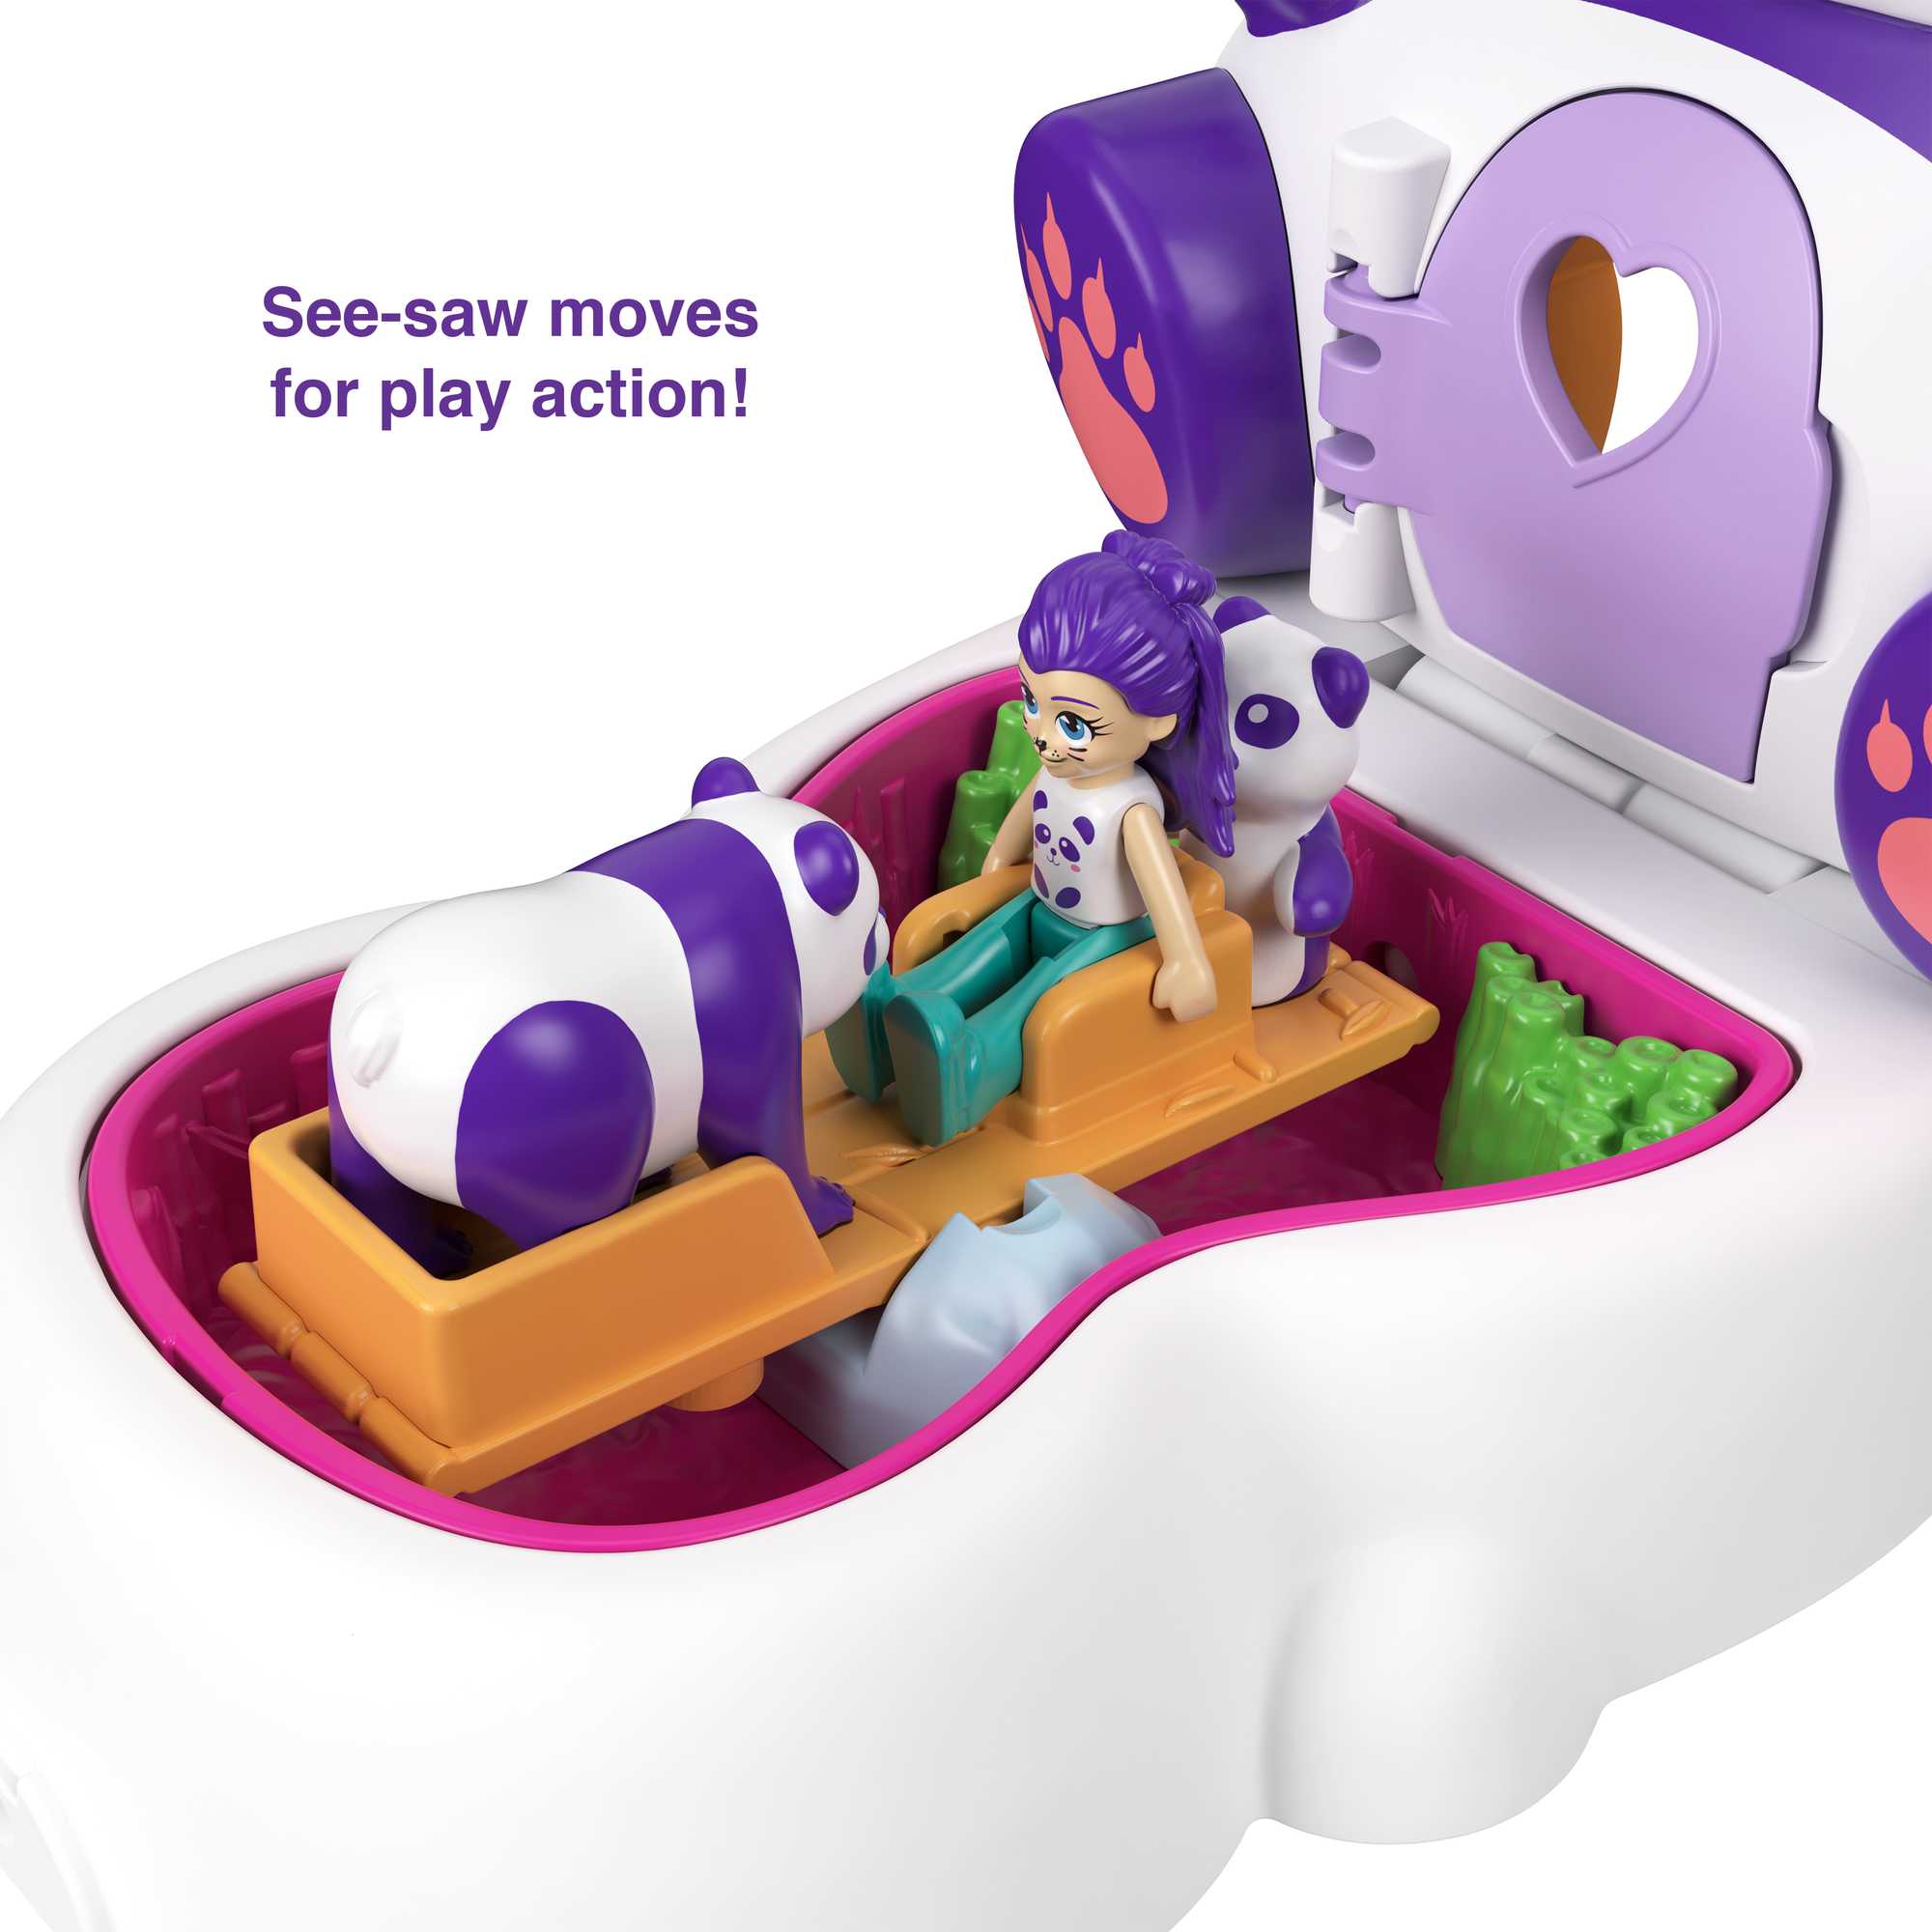 Polly Pocket Flip & Find Panda Compact, Micro Doll, Pet & Accessories, Travel Toy with Flip Bottom - image 4 of 7